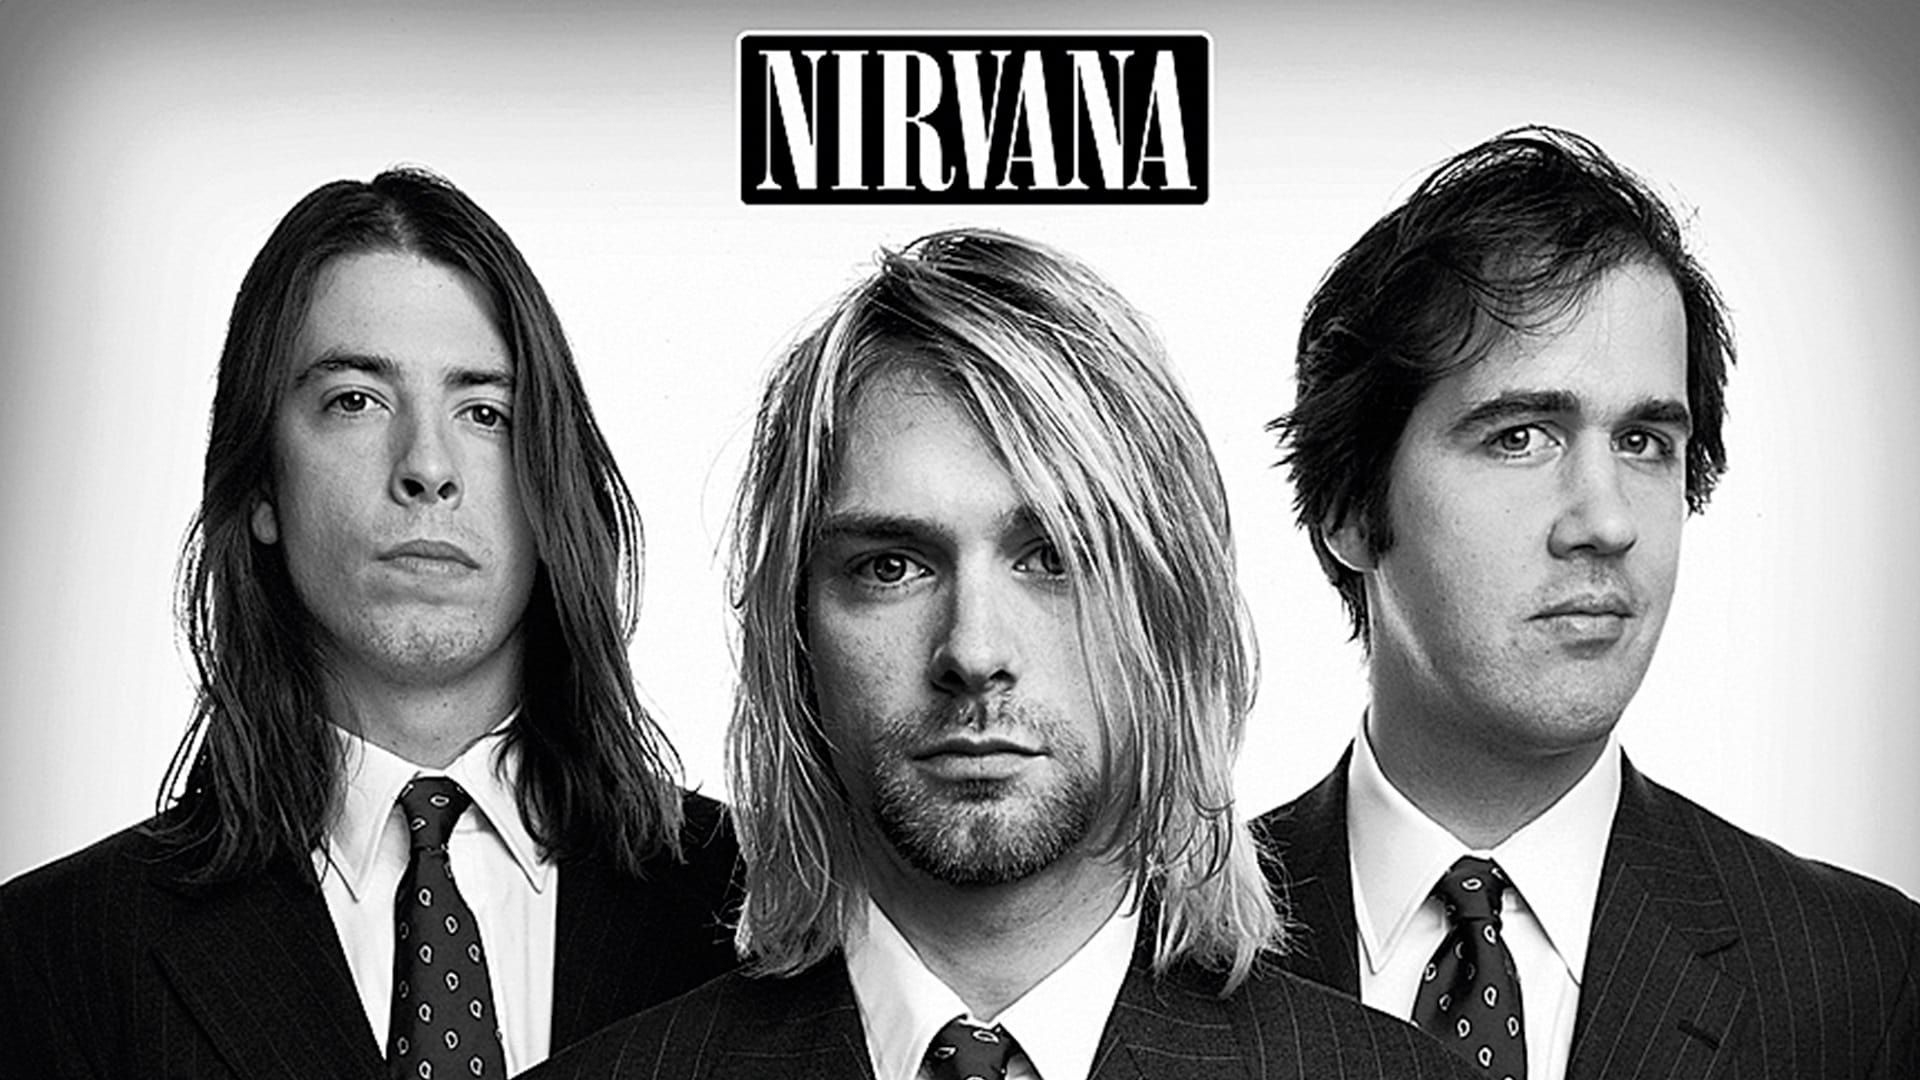 Nirvana: With the Lights Out background